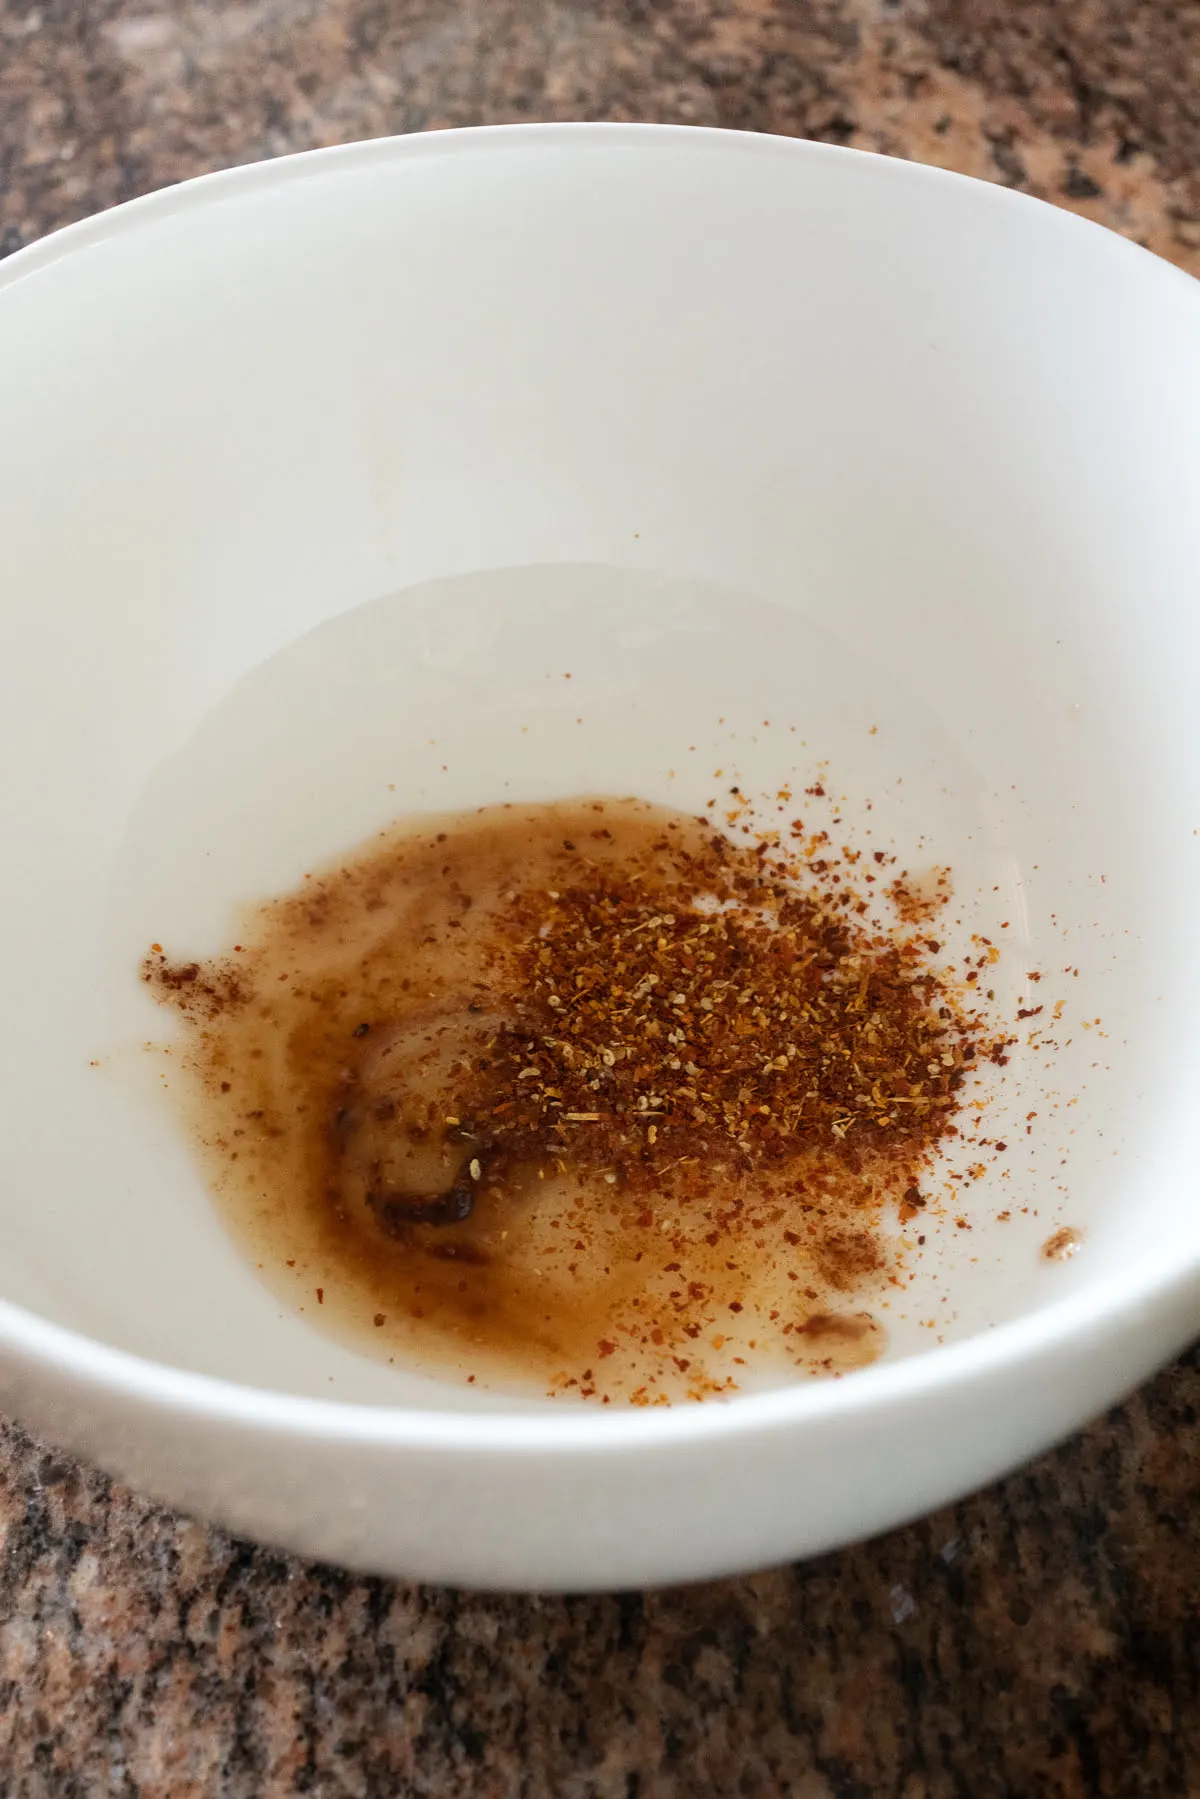 Adding the oil packet and chili powder packet to a bowl.